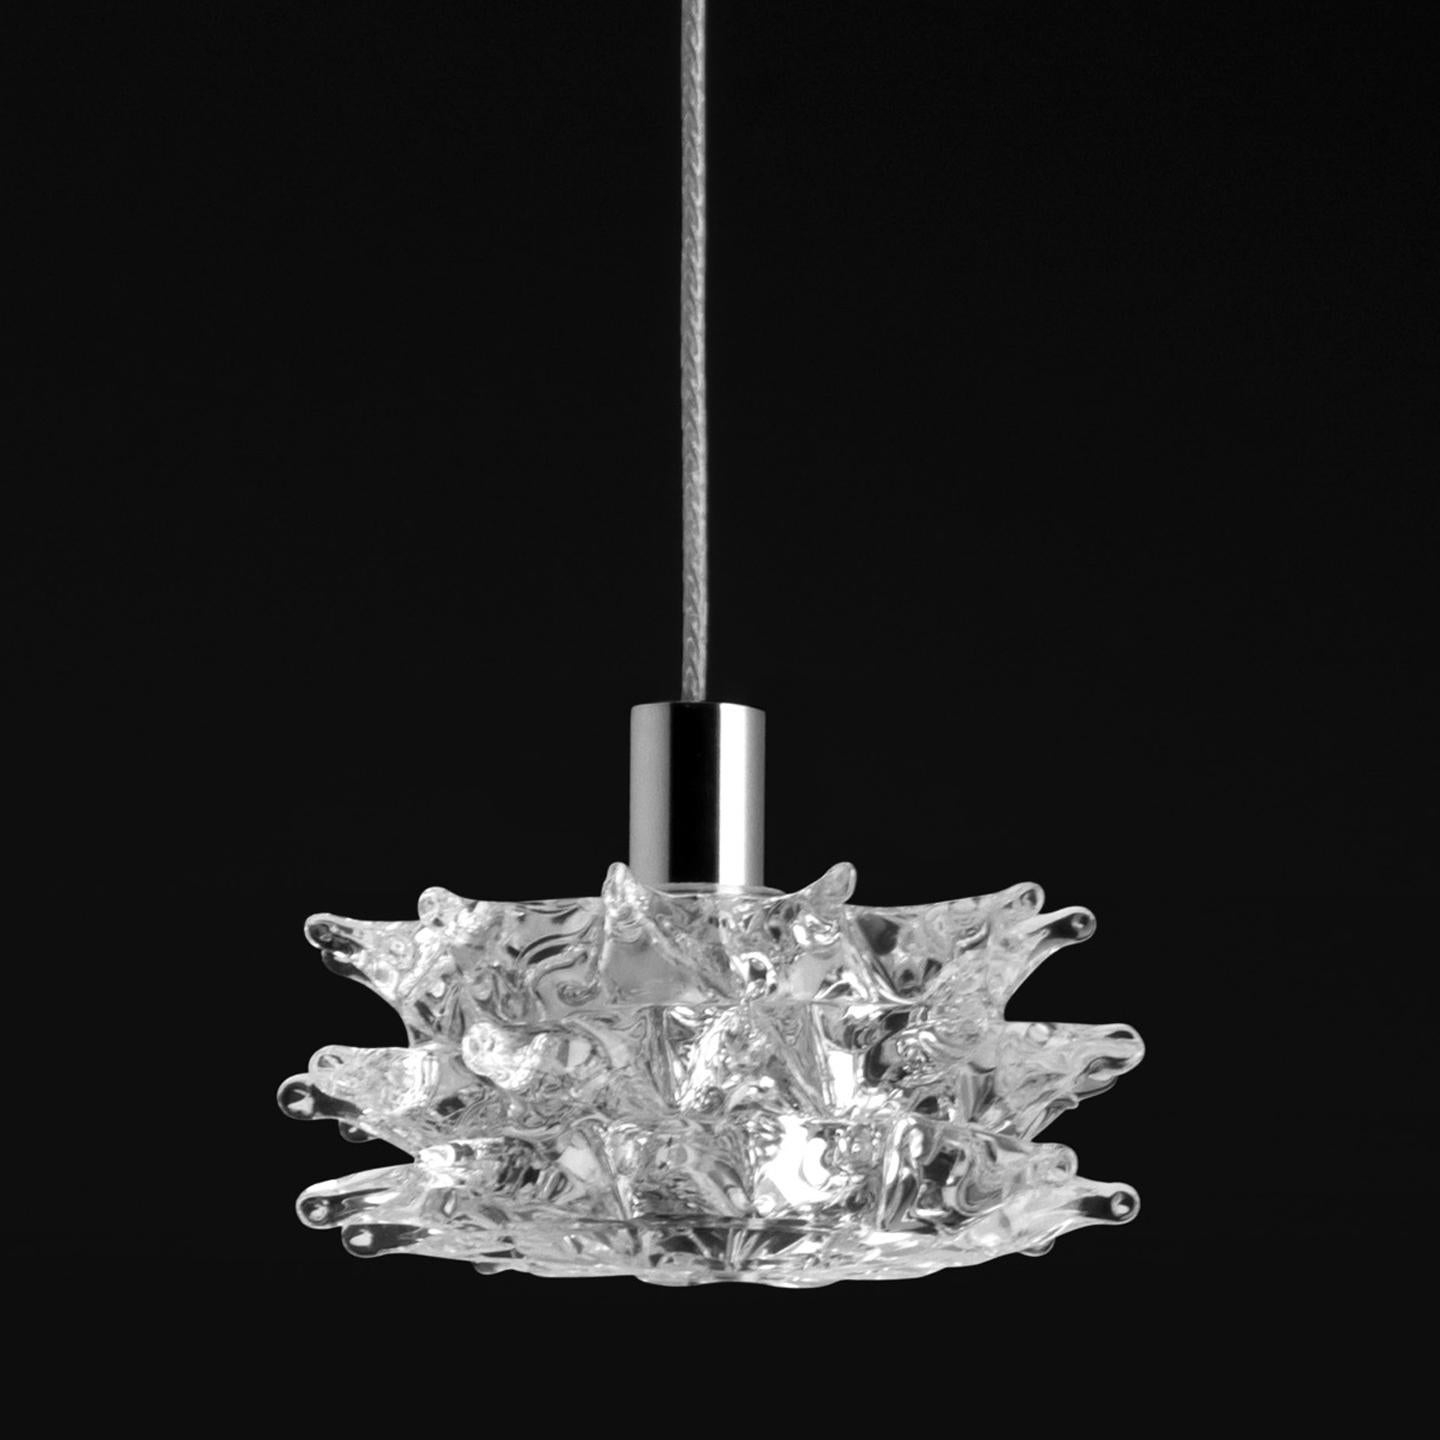 Modern Leucos Kuk S G9 Pendant Light in Transparent & Chrome by Paolo Crepax  For Sale